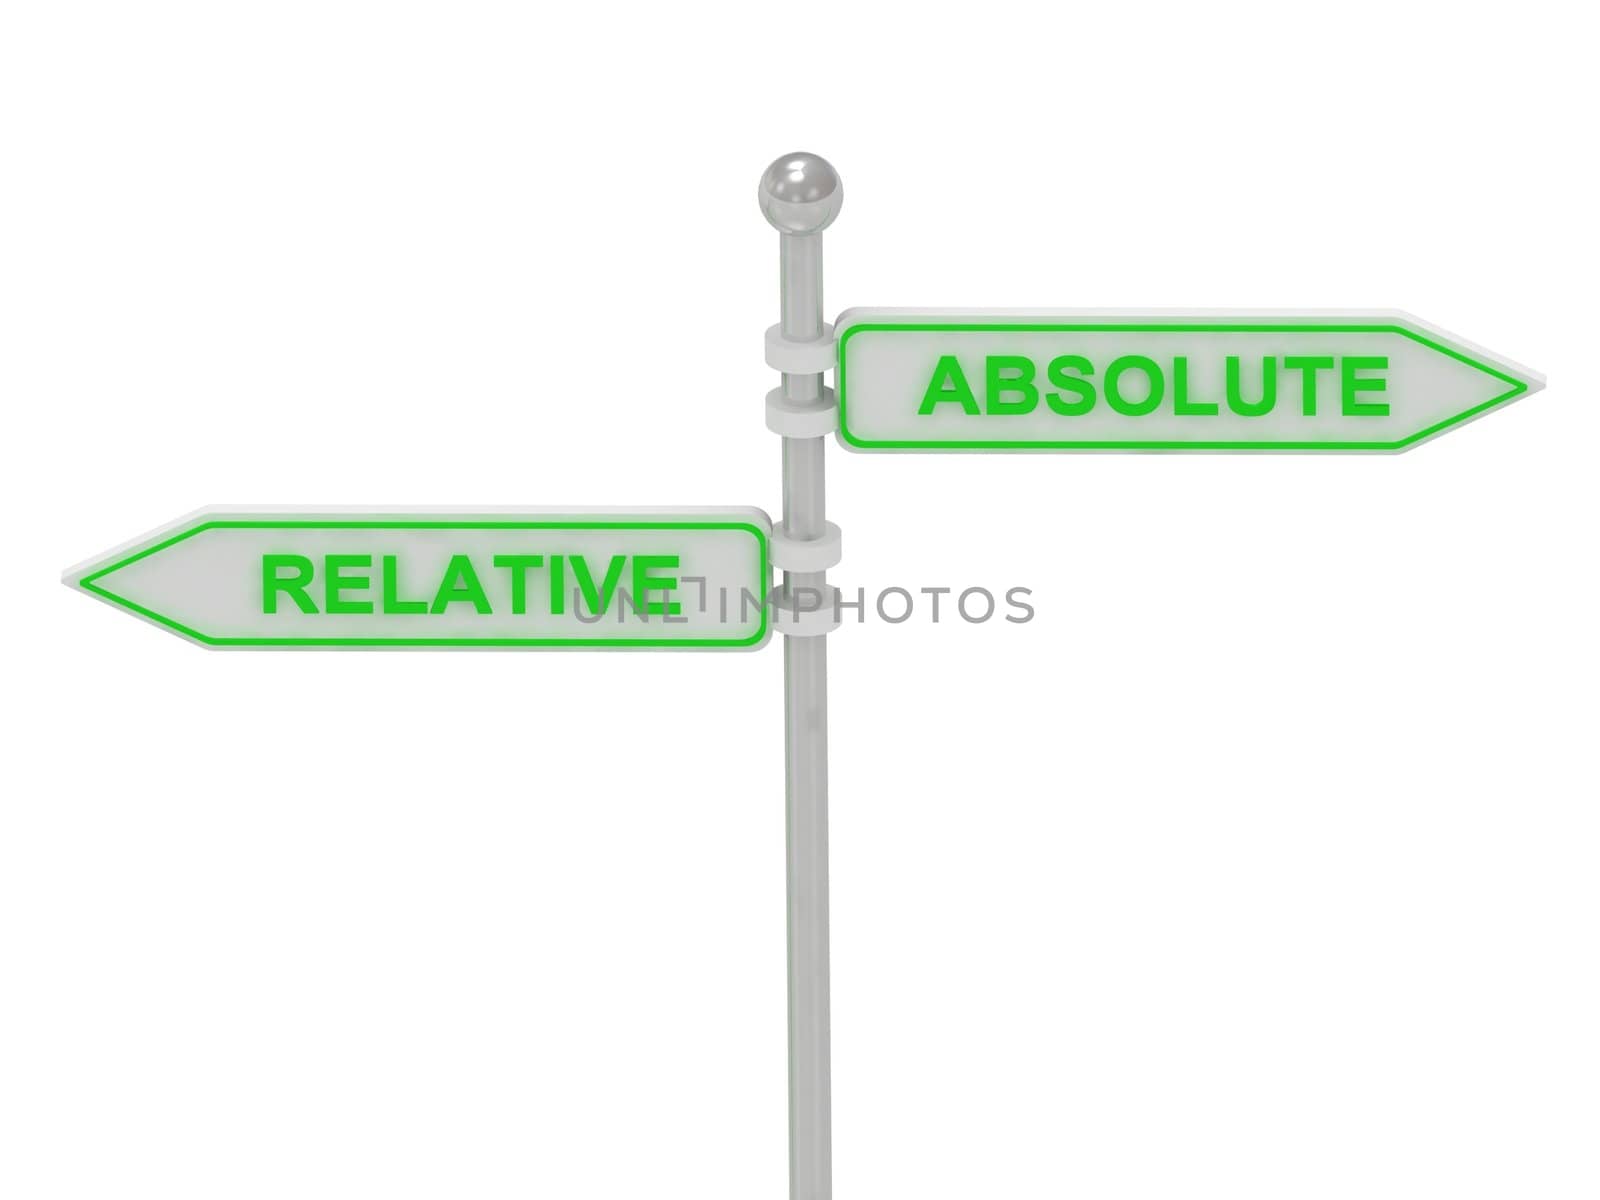 Signs with green "ABSOLUTE" and "RELATIVE" pointing in opposite directions, Isolated on white background, 3d rendering